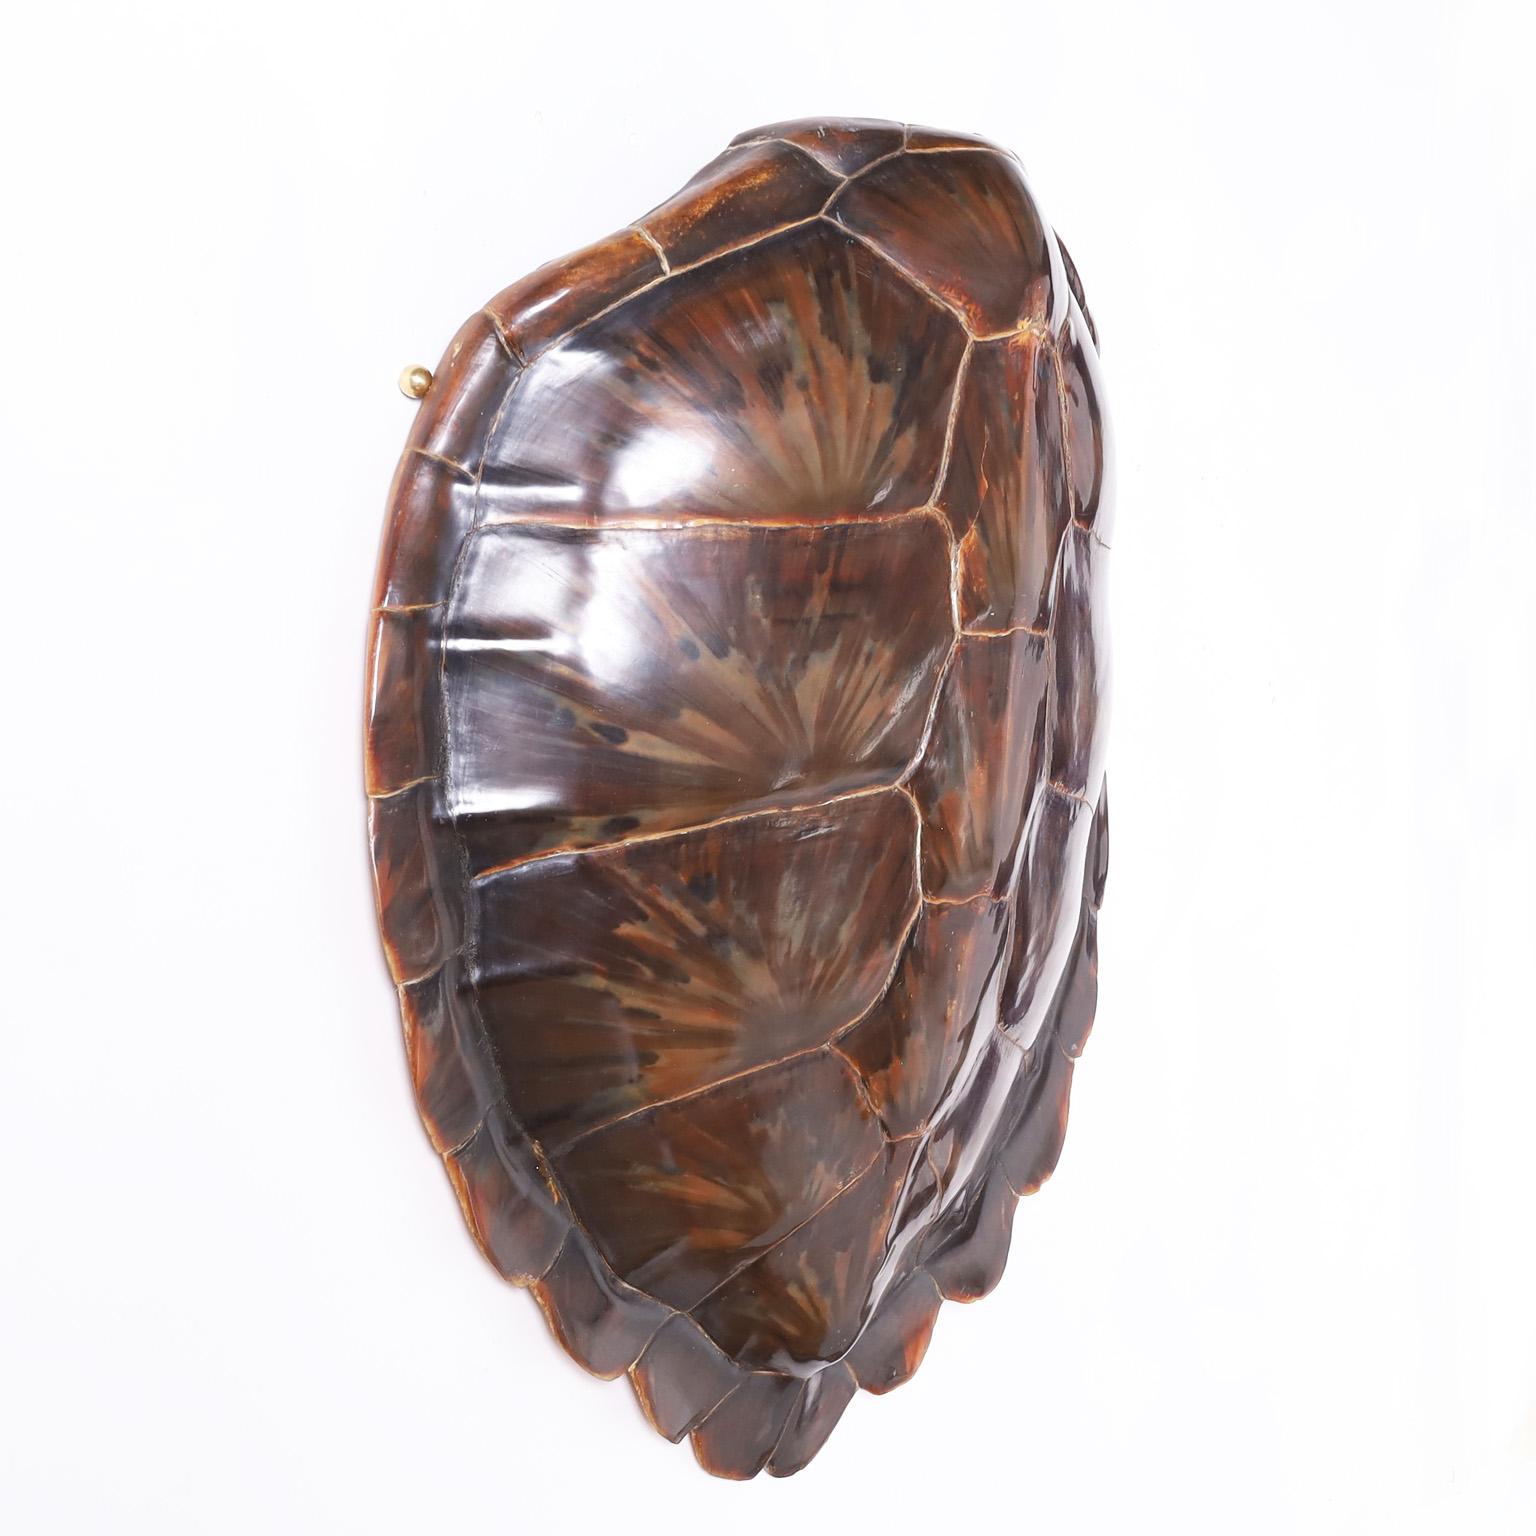 Large Green turtle shell or carapace with its iconic form and lush variegated colors, one of mother nature's sculptural masterpieces.